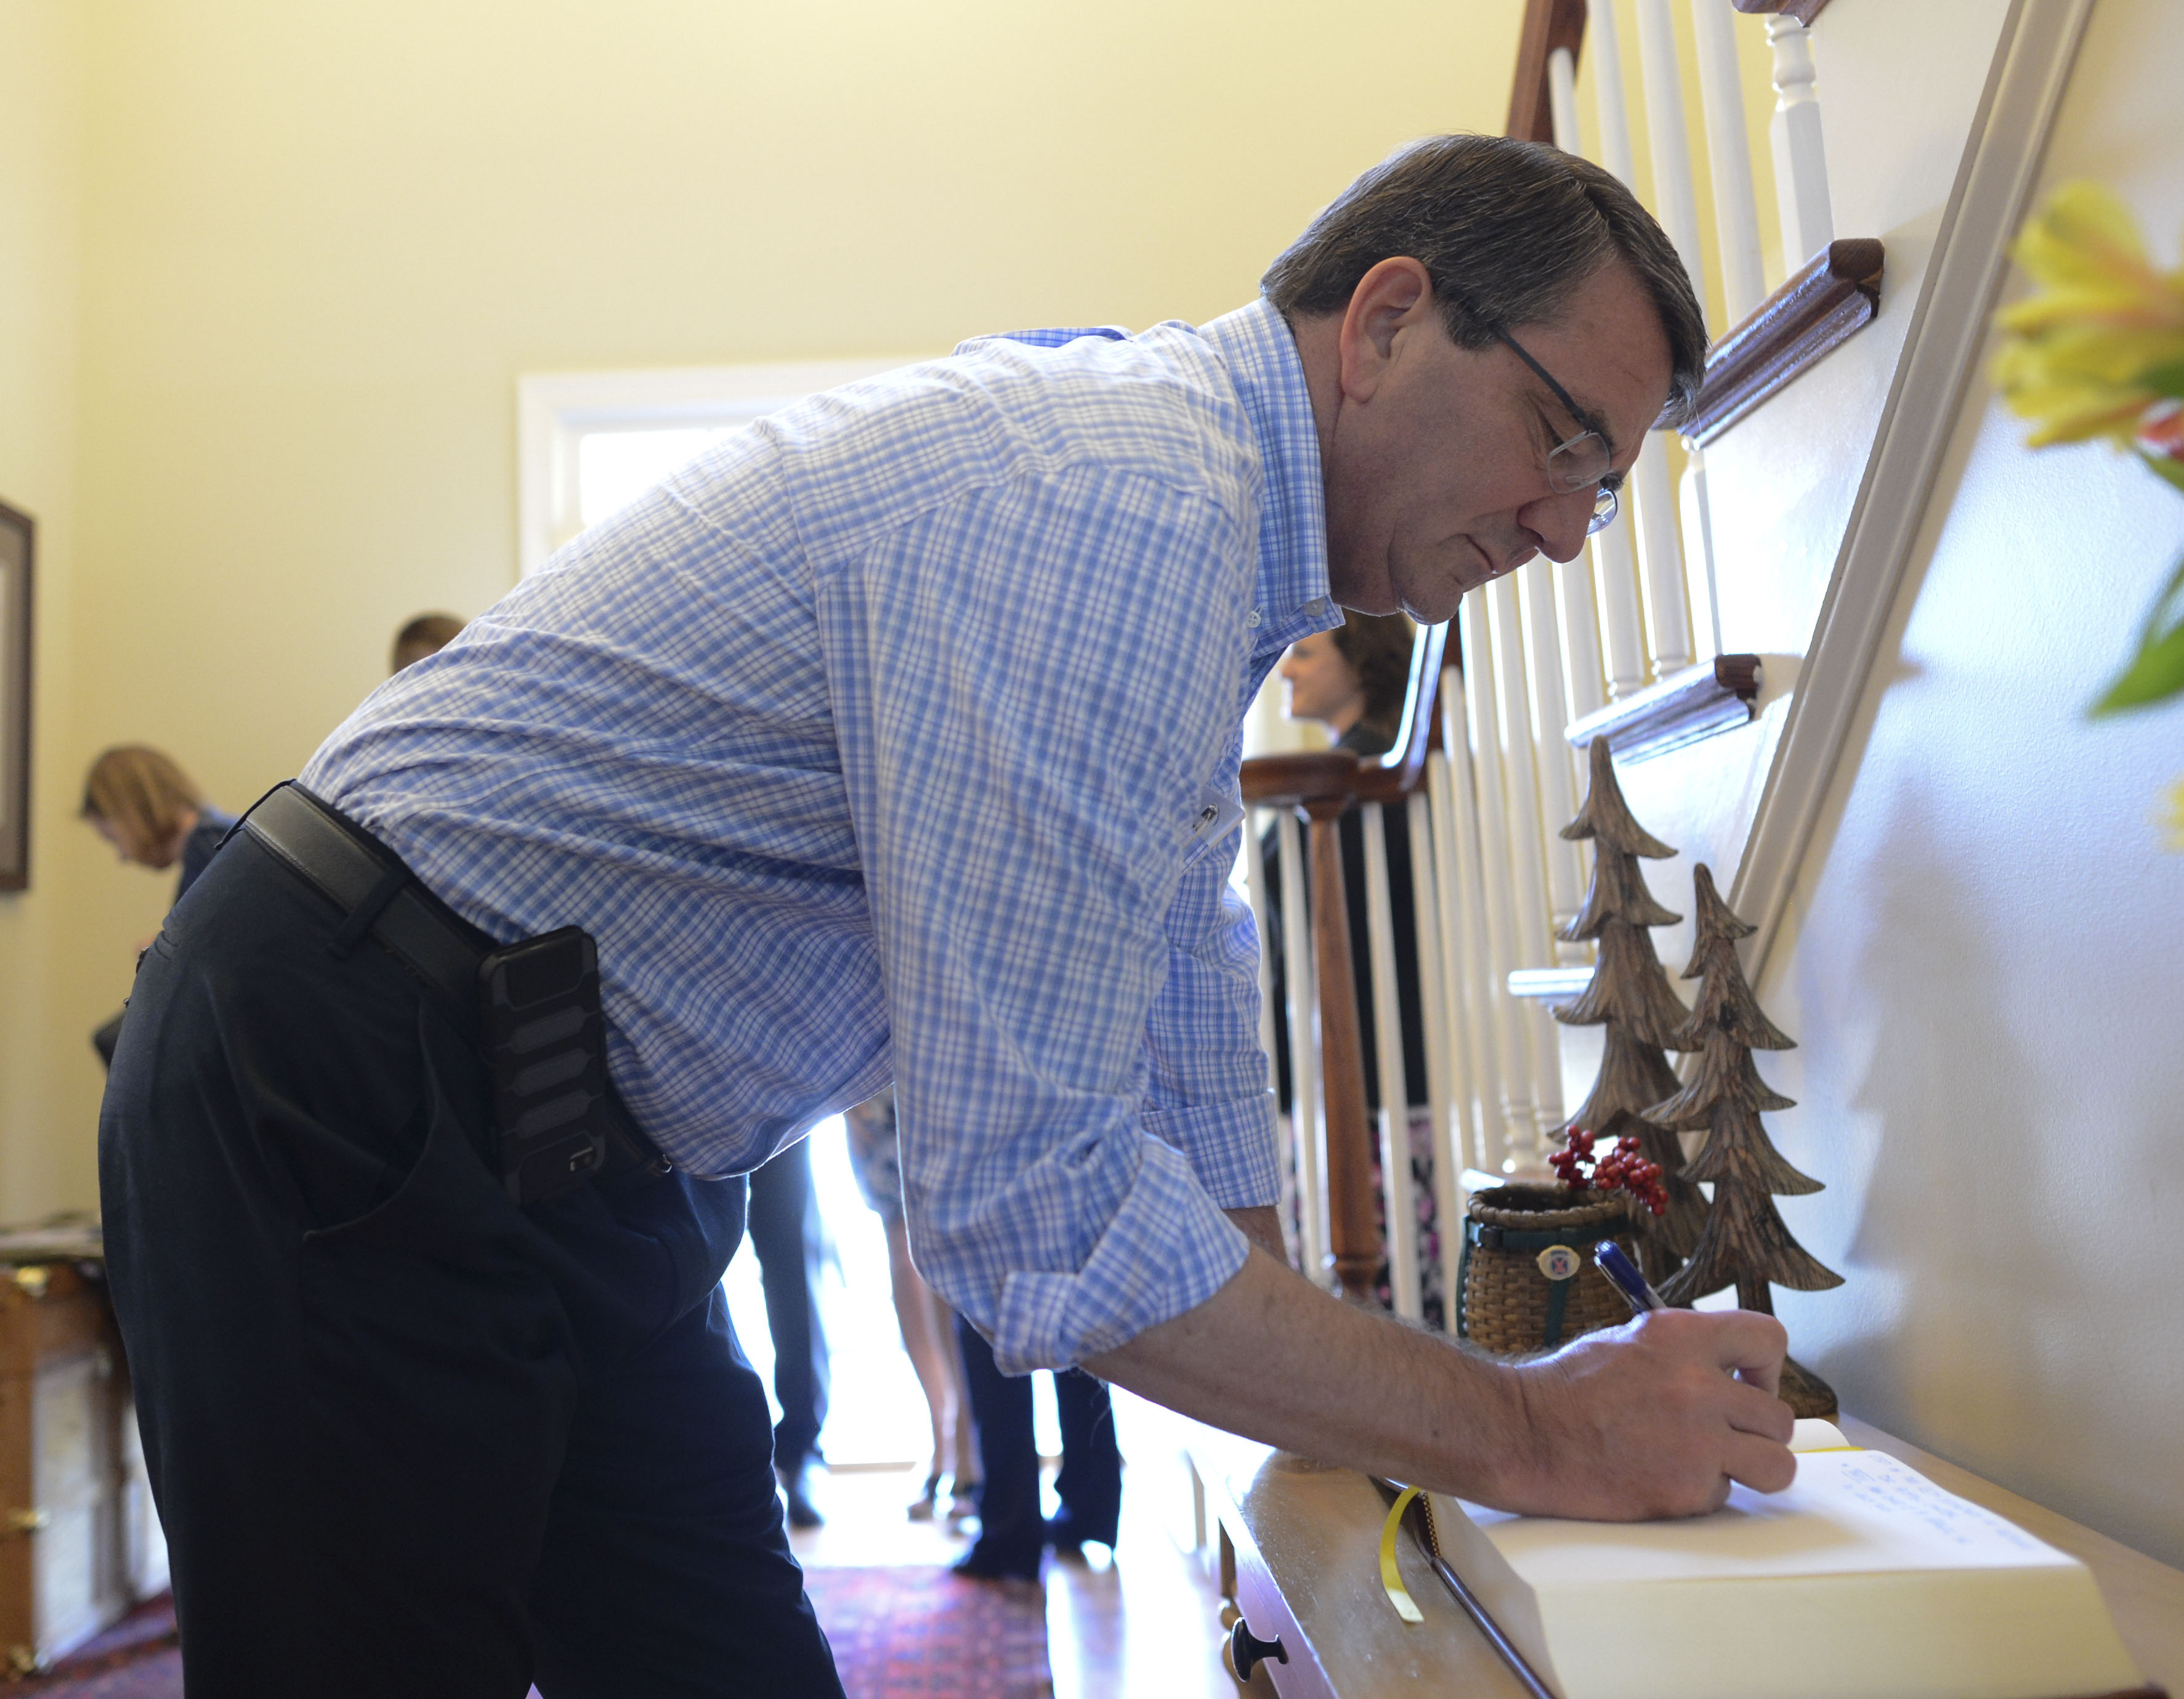 Defense Secretary Ash Carter Signs A Guest Book At The House Of Army Lt Gen Stephen